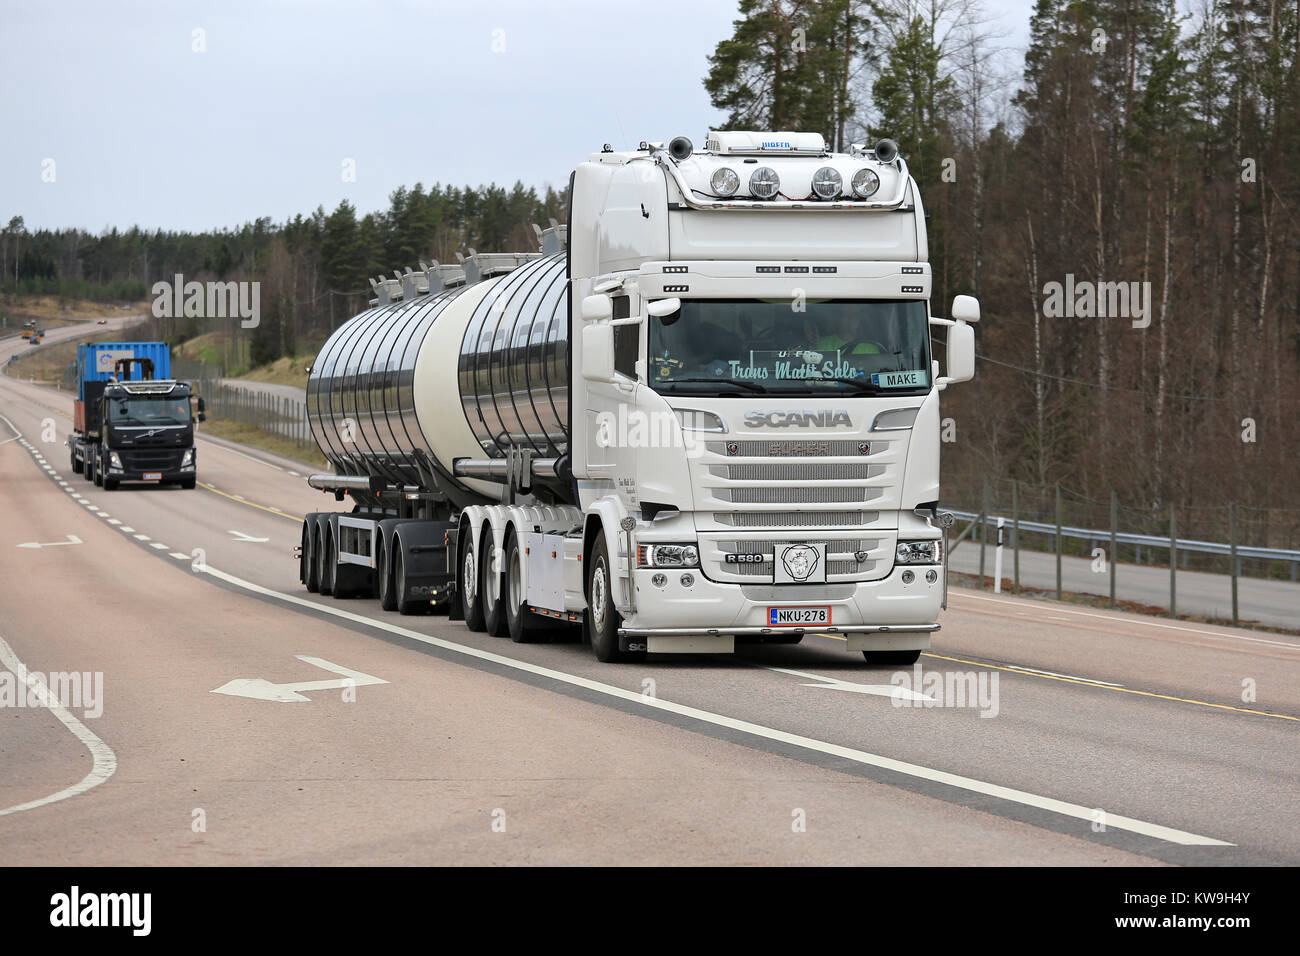 ORIVESI, FINLAND - MAY 17, 2017: Off-white super Scania R580 tank truck of Trans Matti Salo hauls goods on highway among truck traffic in Central Finl Stock Photo